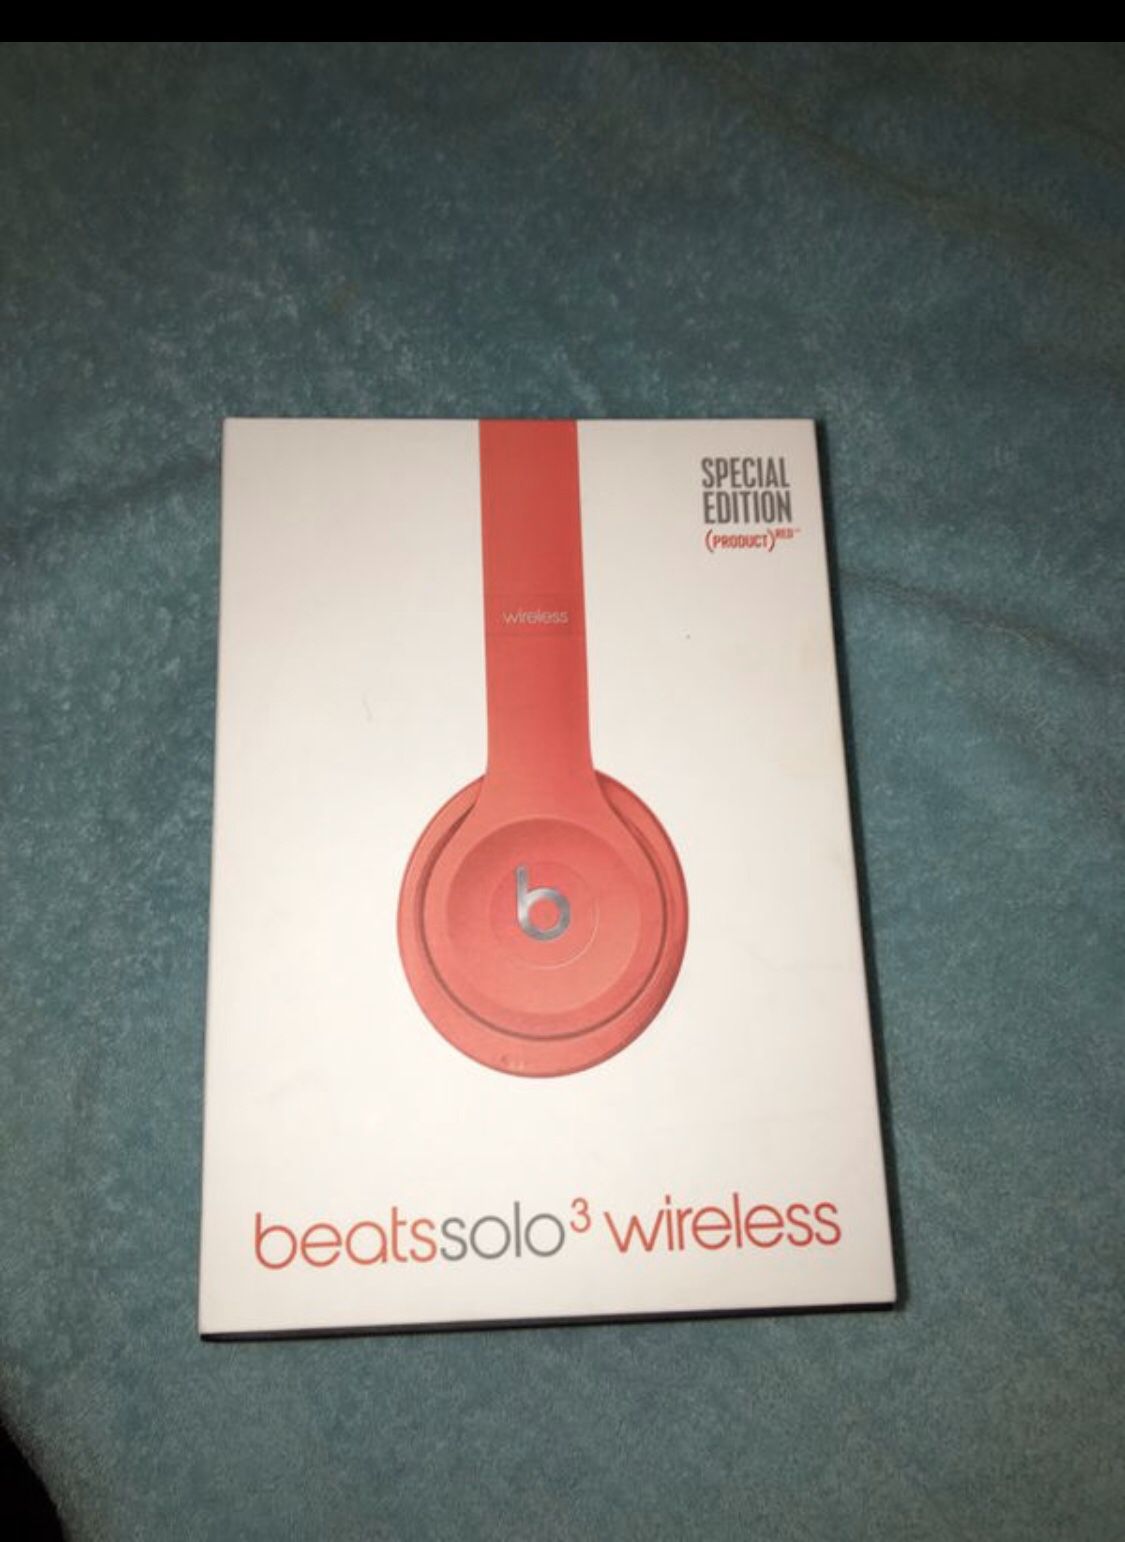 Beats solo 3 wireless product red